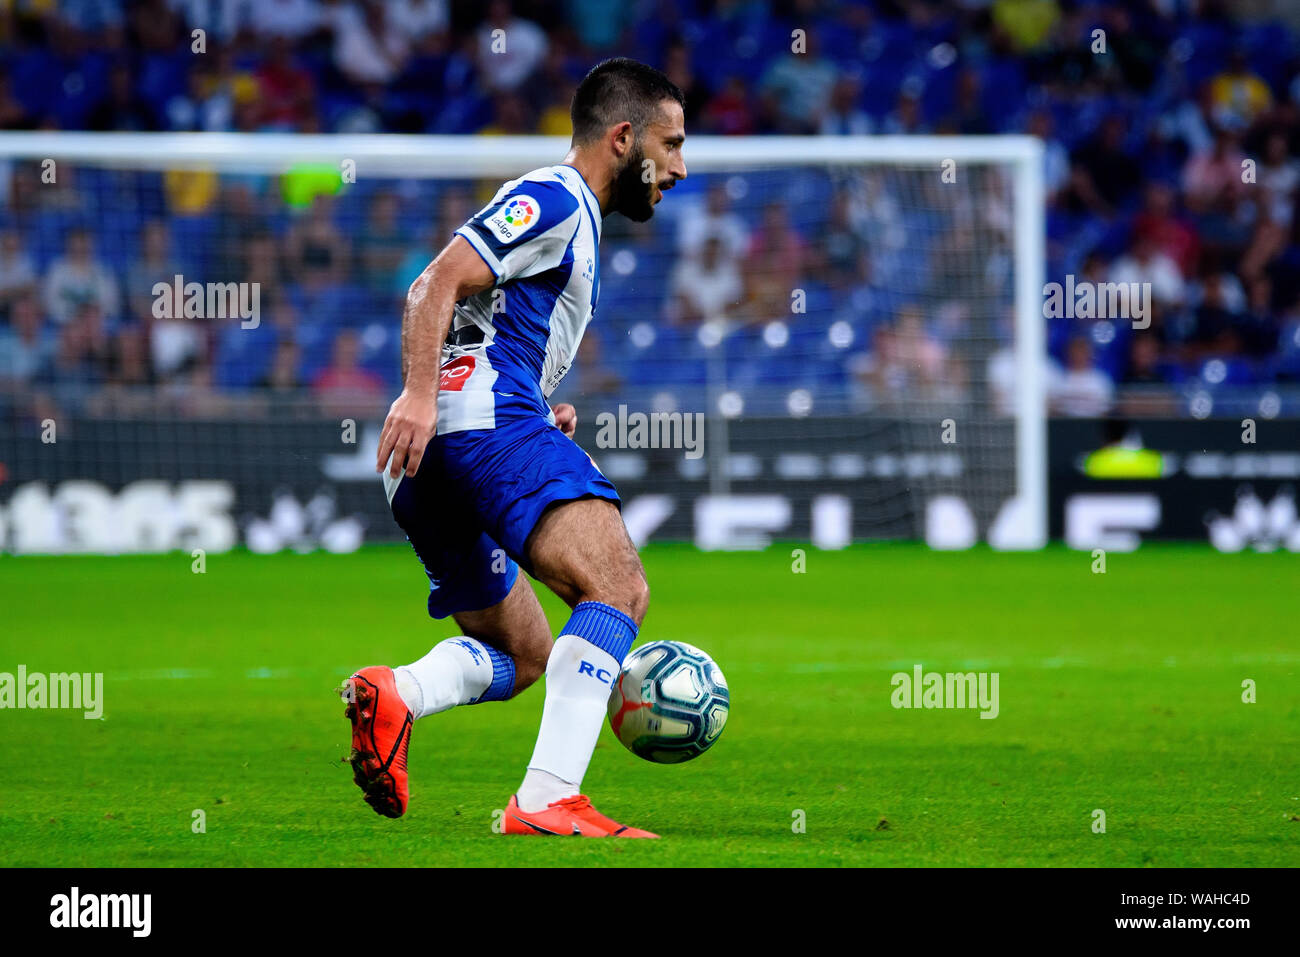 BARCELONA - AUG 18: Matias Vargas plays at the La Liga match between RCD Espanyol and Sevilla CF at the RCDE Stadium on August 18, 2019 in Barcelona, Stock Photo